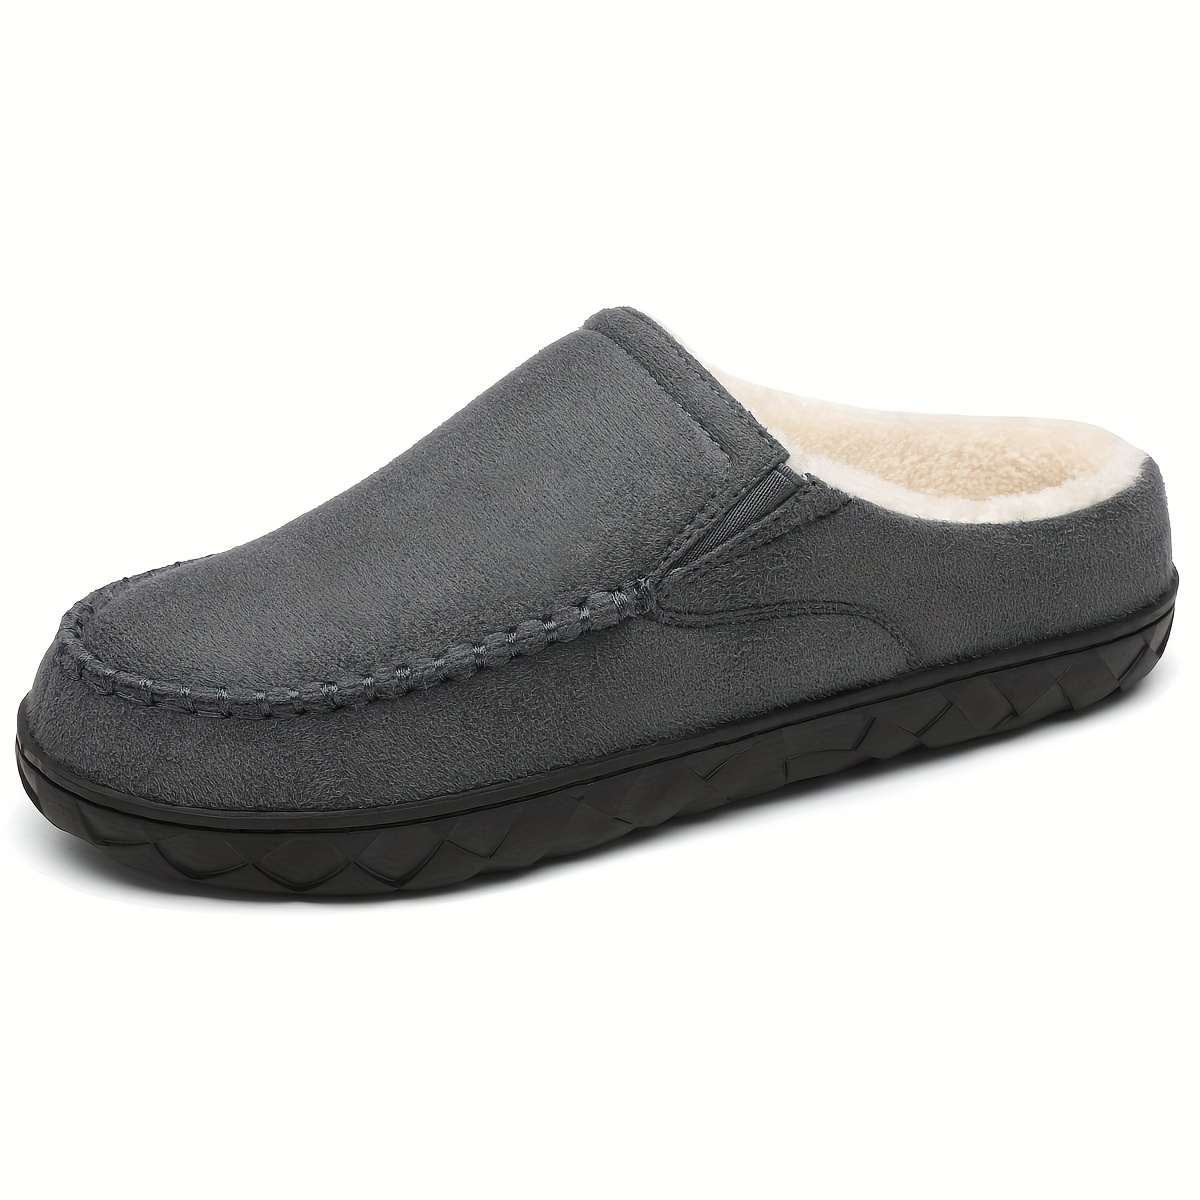 moccasin house slippers men s soft plush cozy lightweight